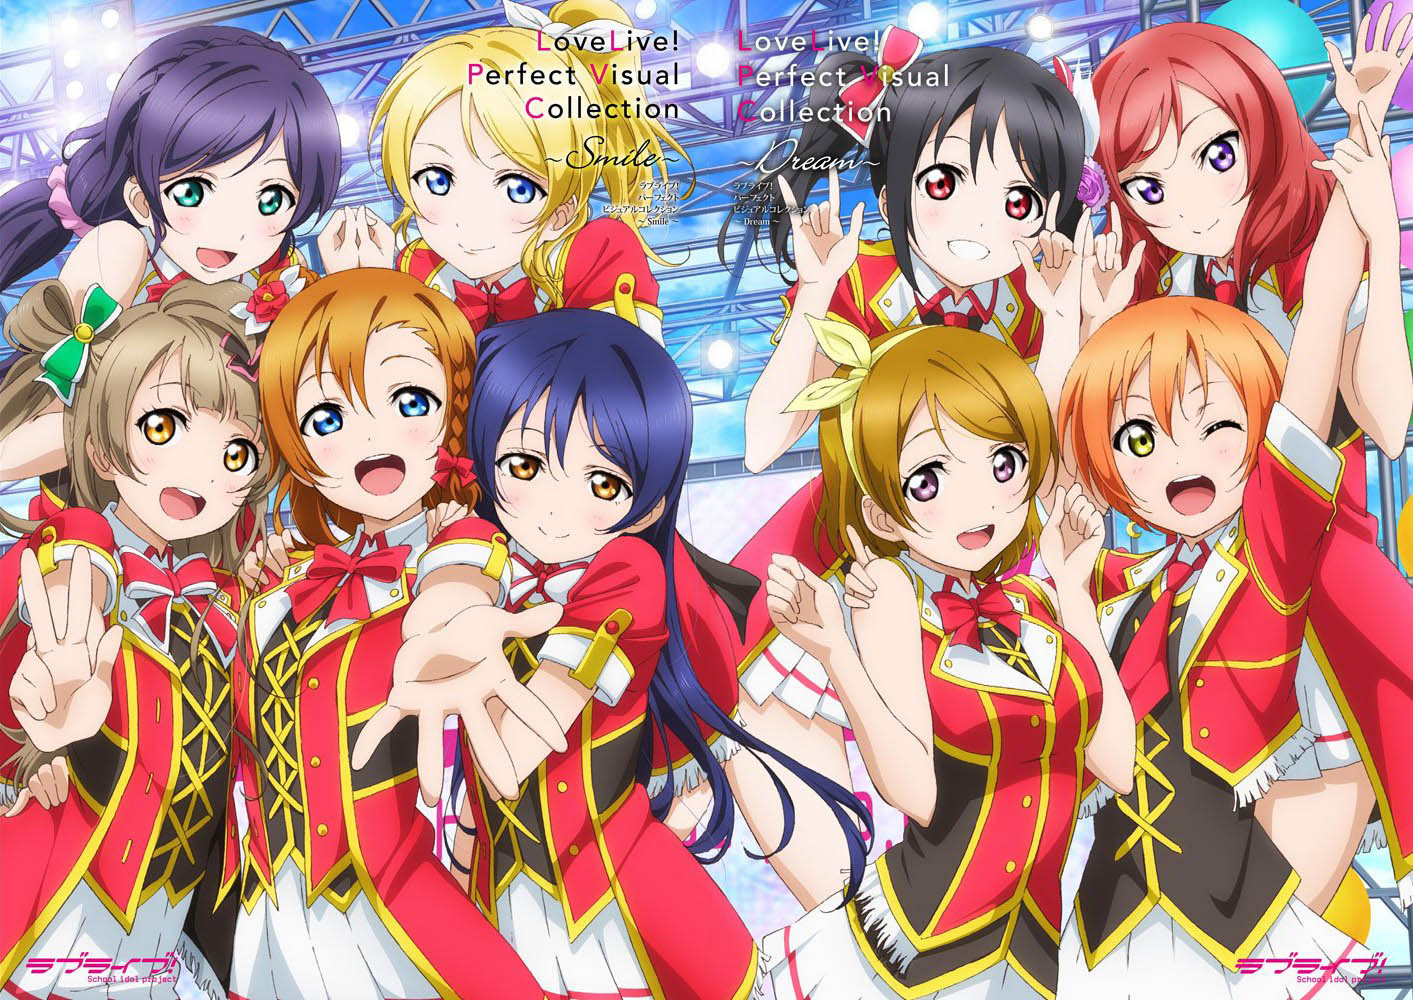 Free Download 1413x1000 For Your Desktop Mobile Tablet Explore 96 Love Live Wallpapers Live Love Wallpaper Love Live Wallpaper Love Live Wallpapers